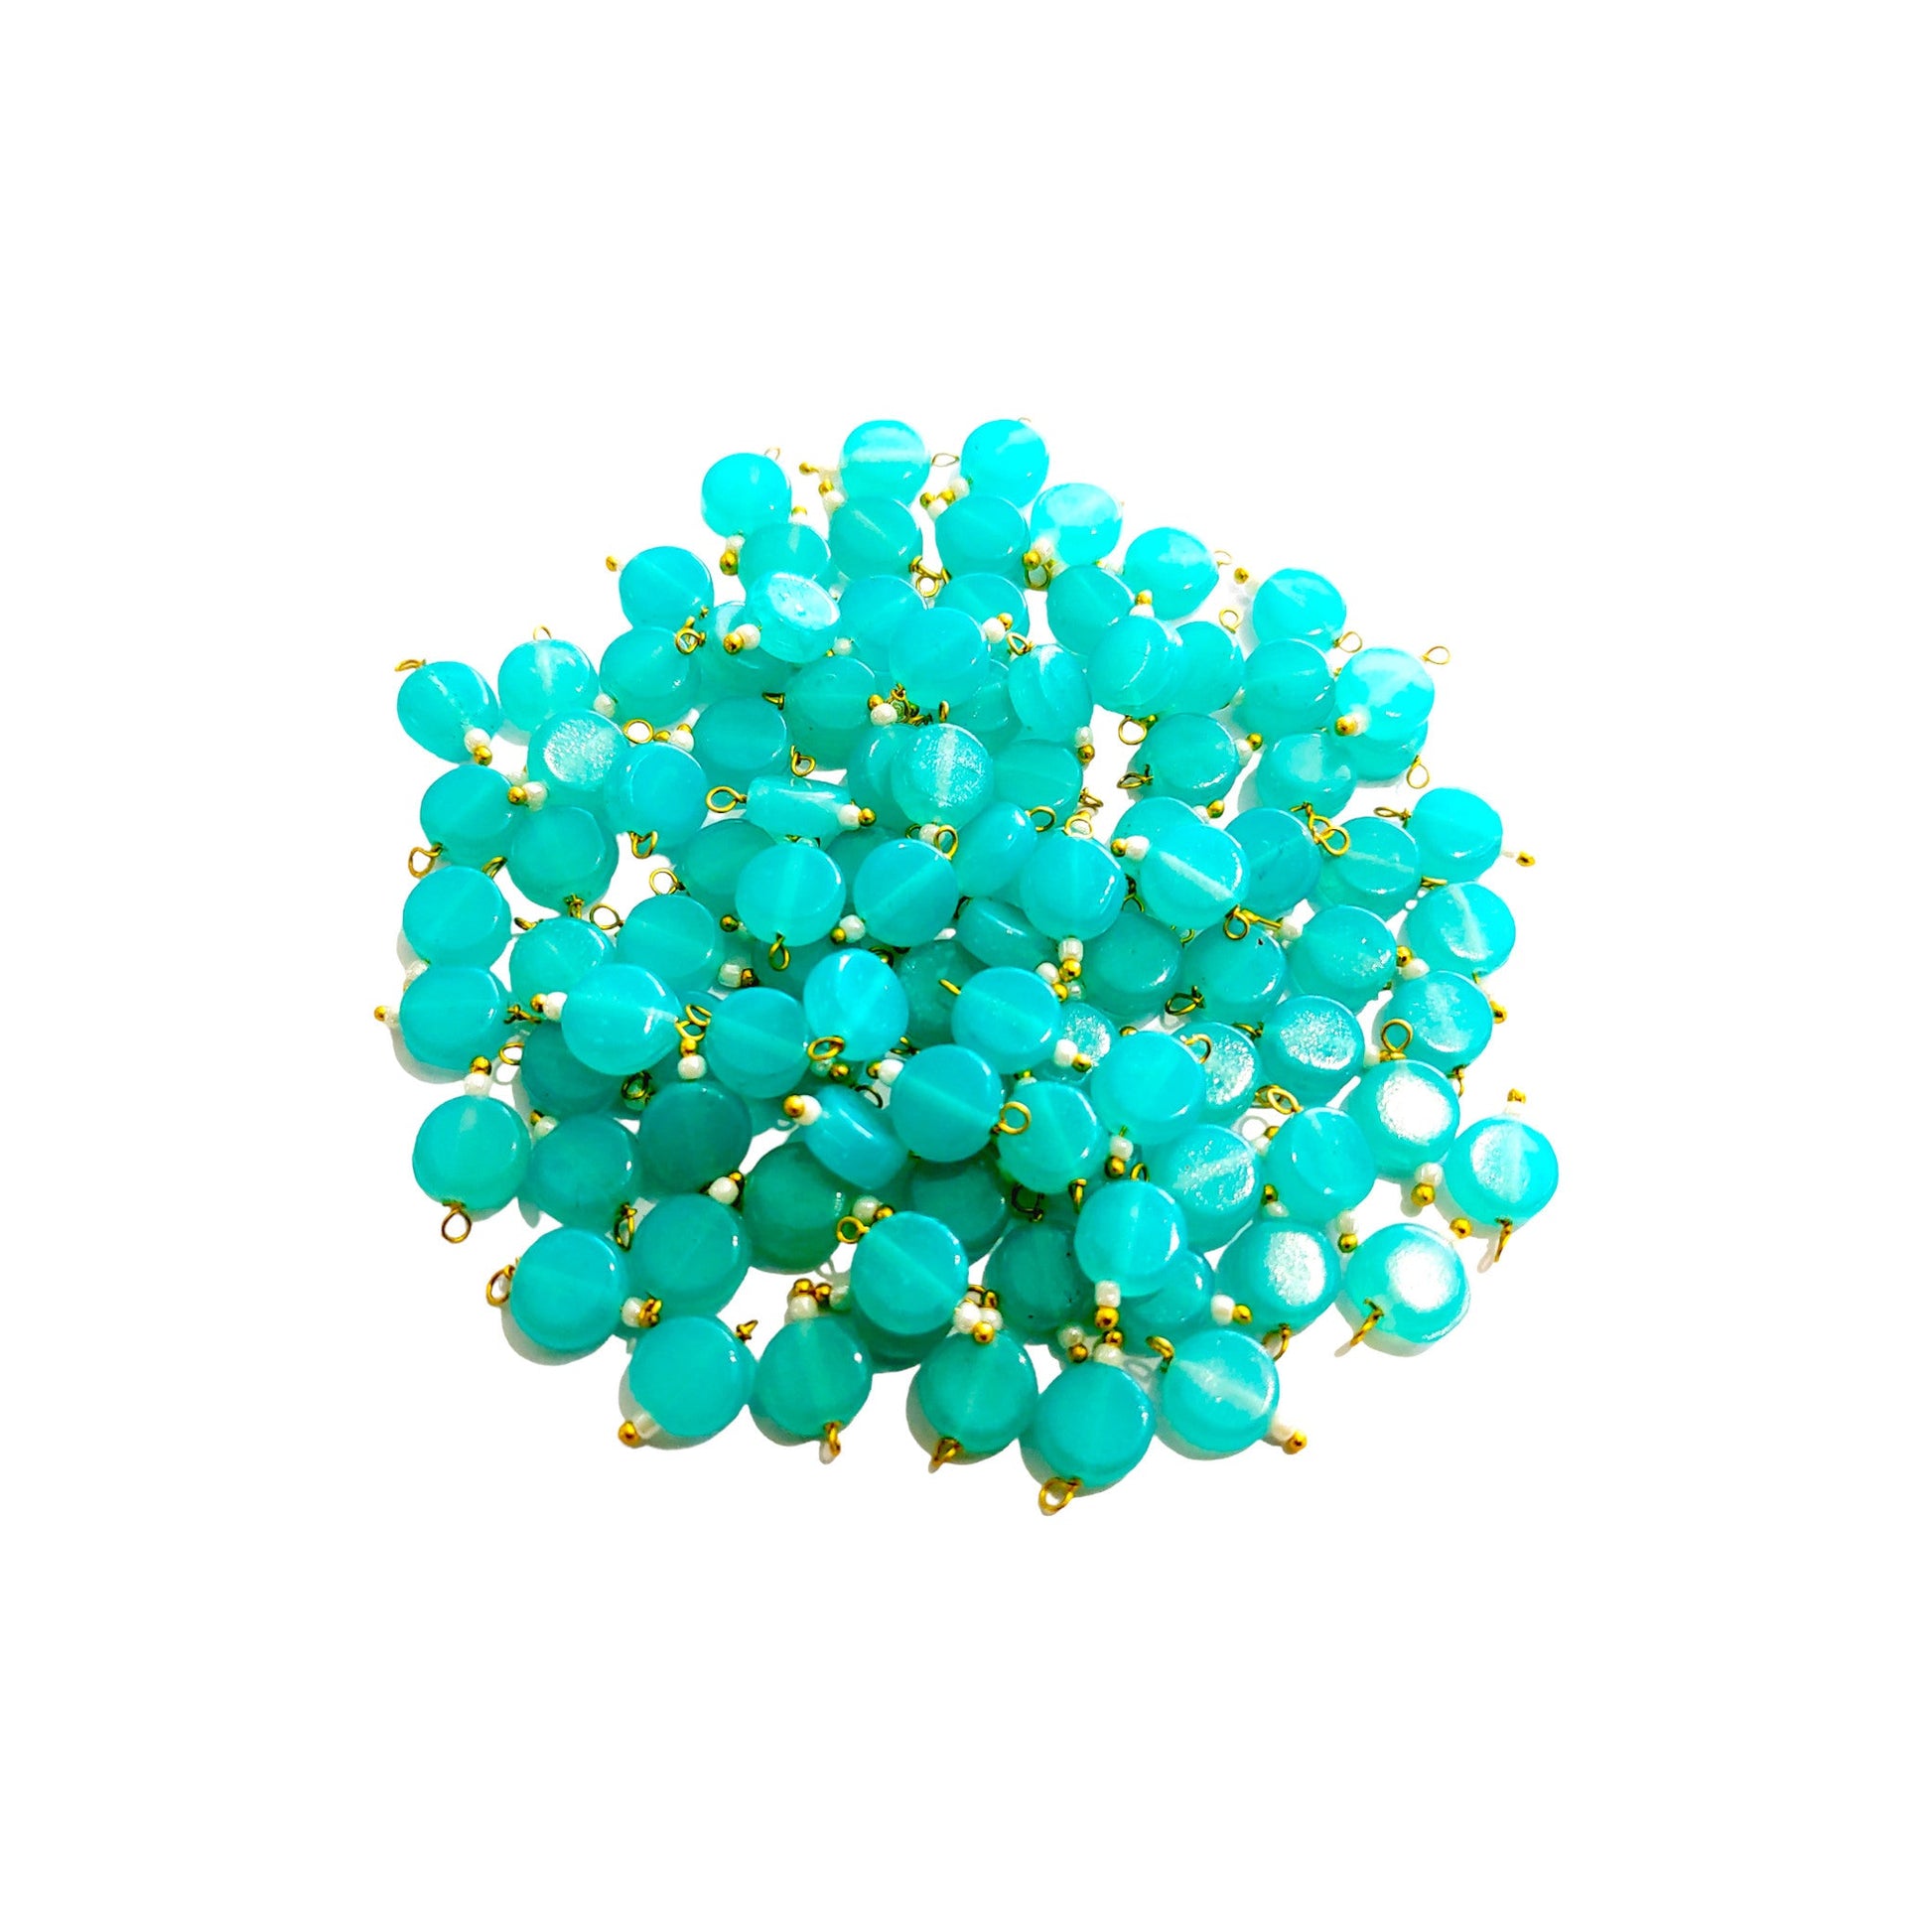 Indian Petals 50 - 100 Pieces Color Coin Shape Latkan Glass Beads for Art Craft jewelry Making or Decorations